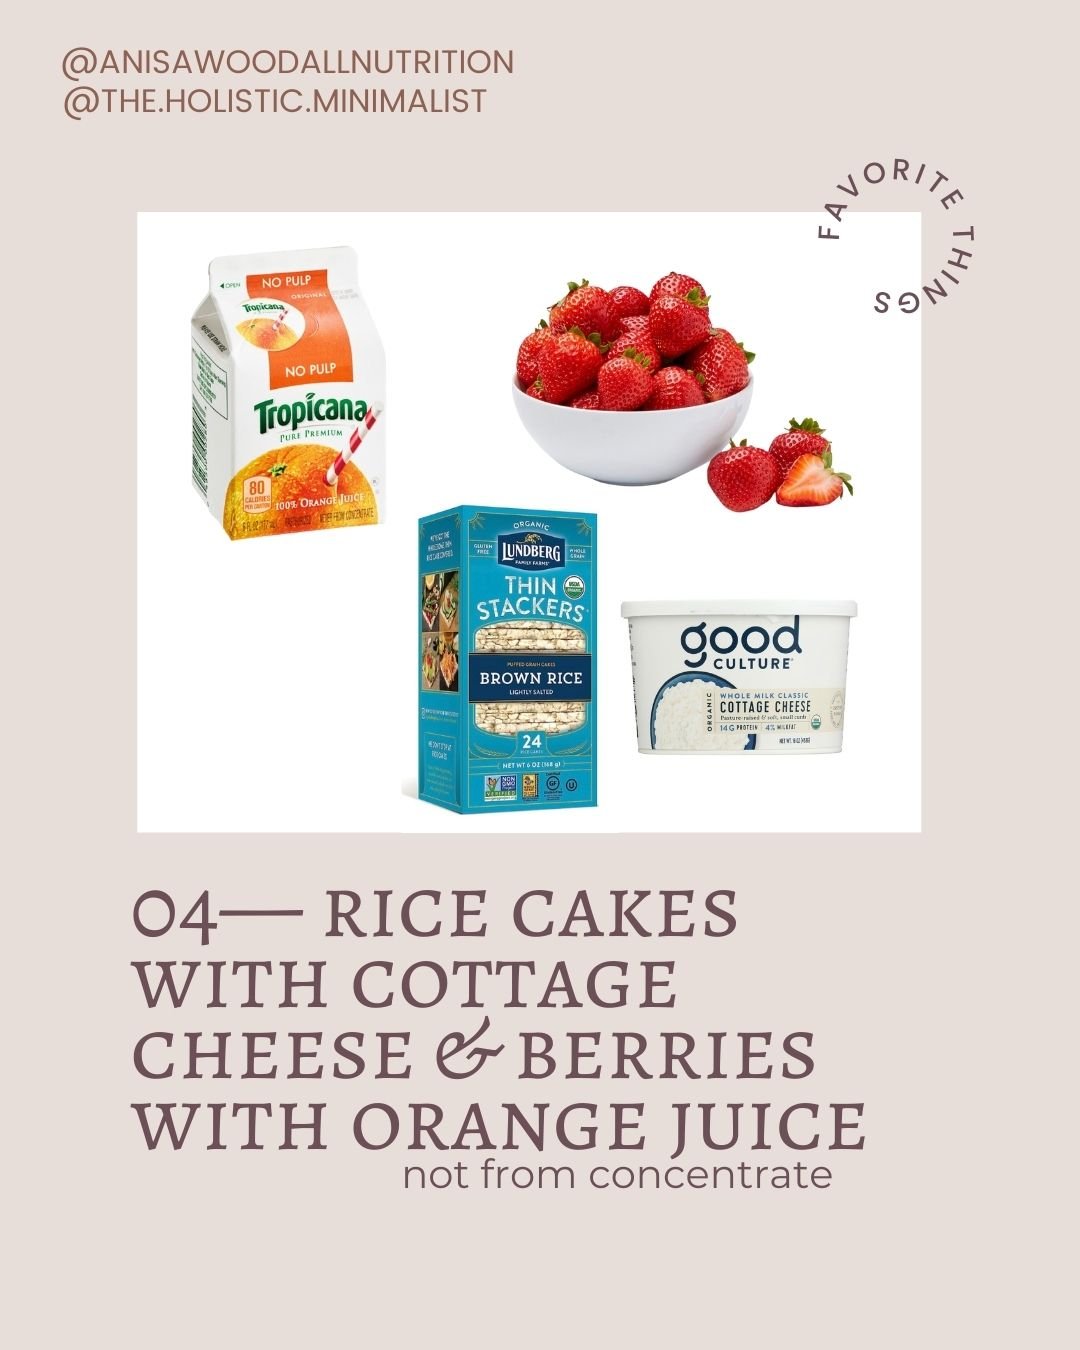 Rice cakes with cottage cheese & berries with orange juice 